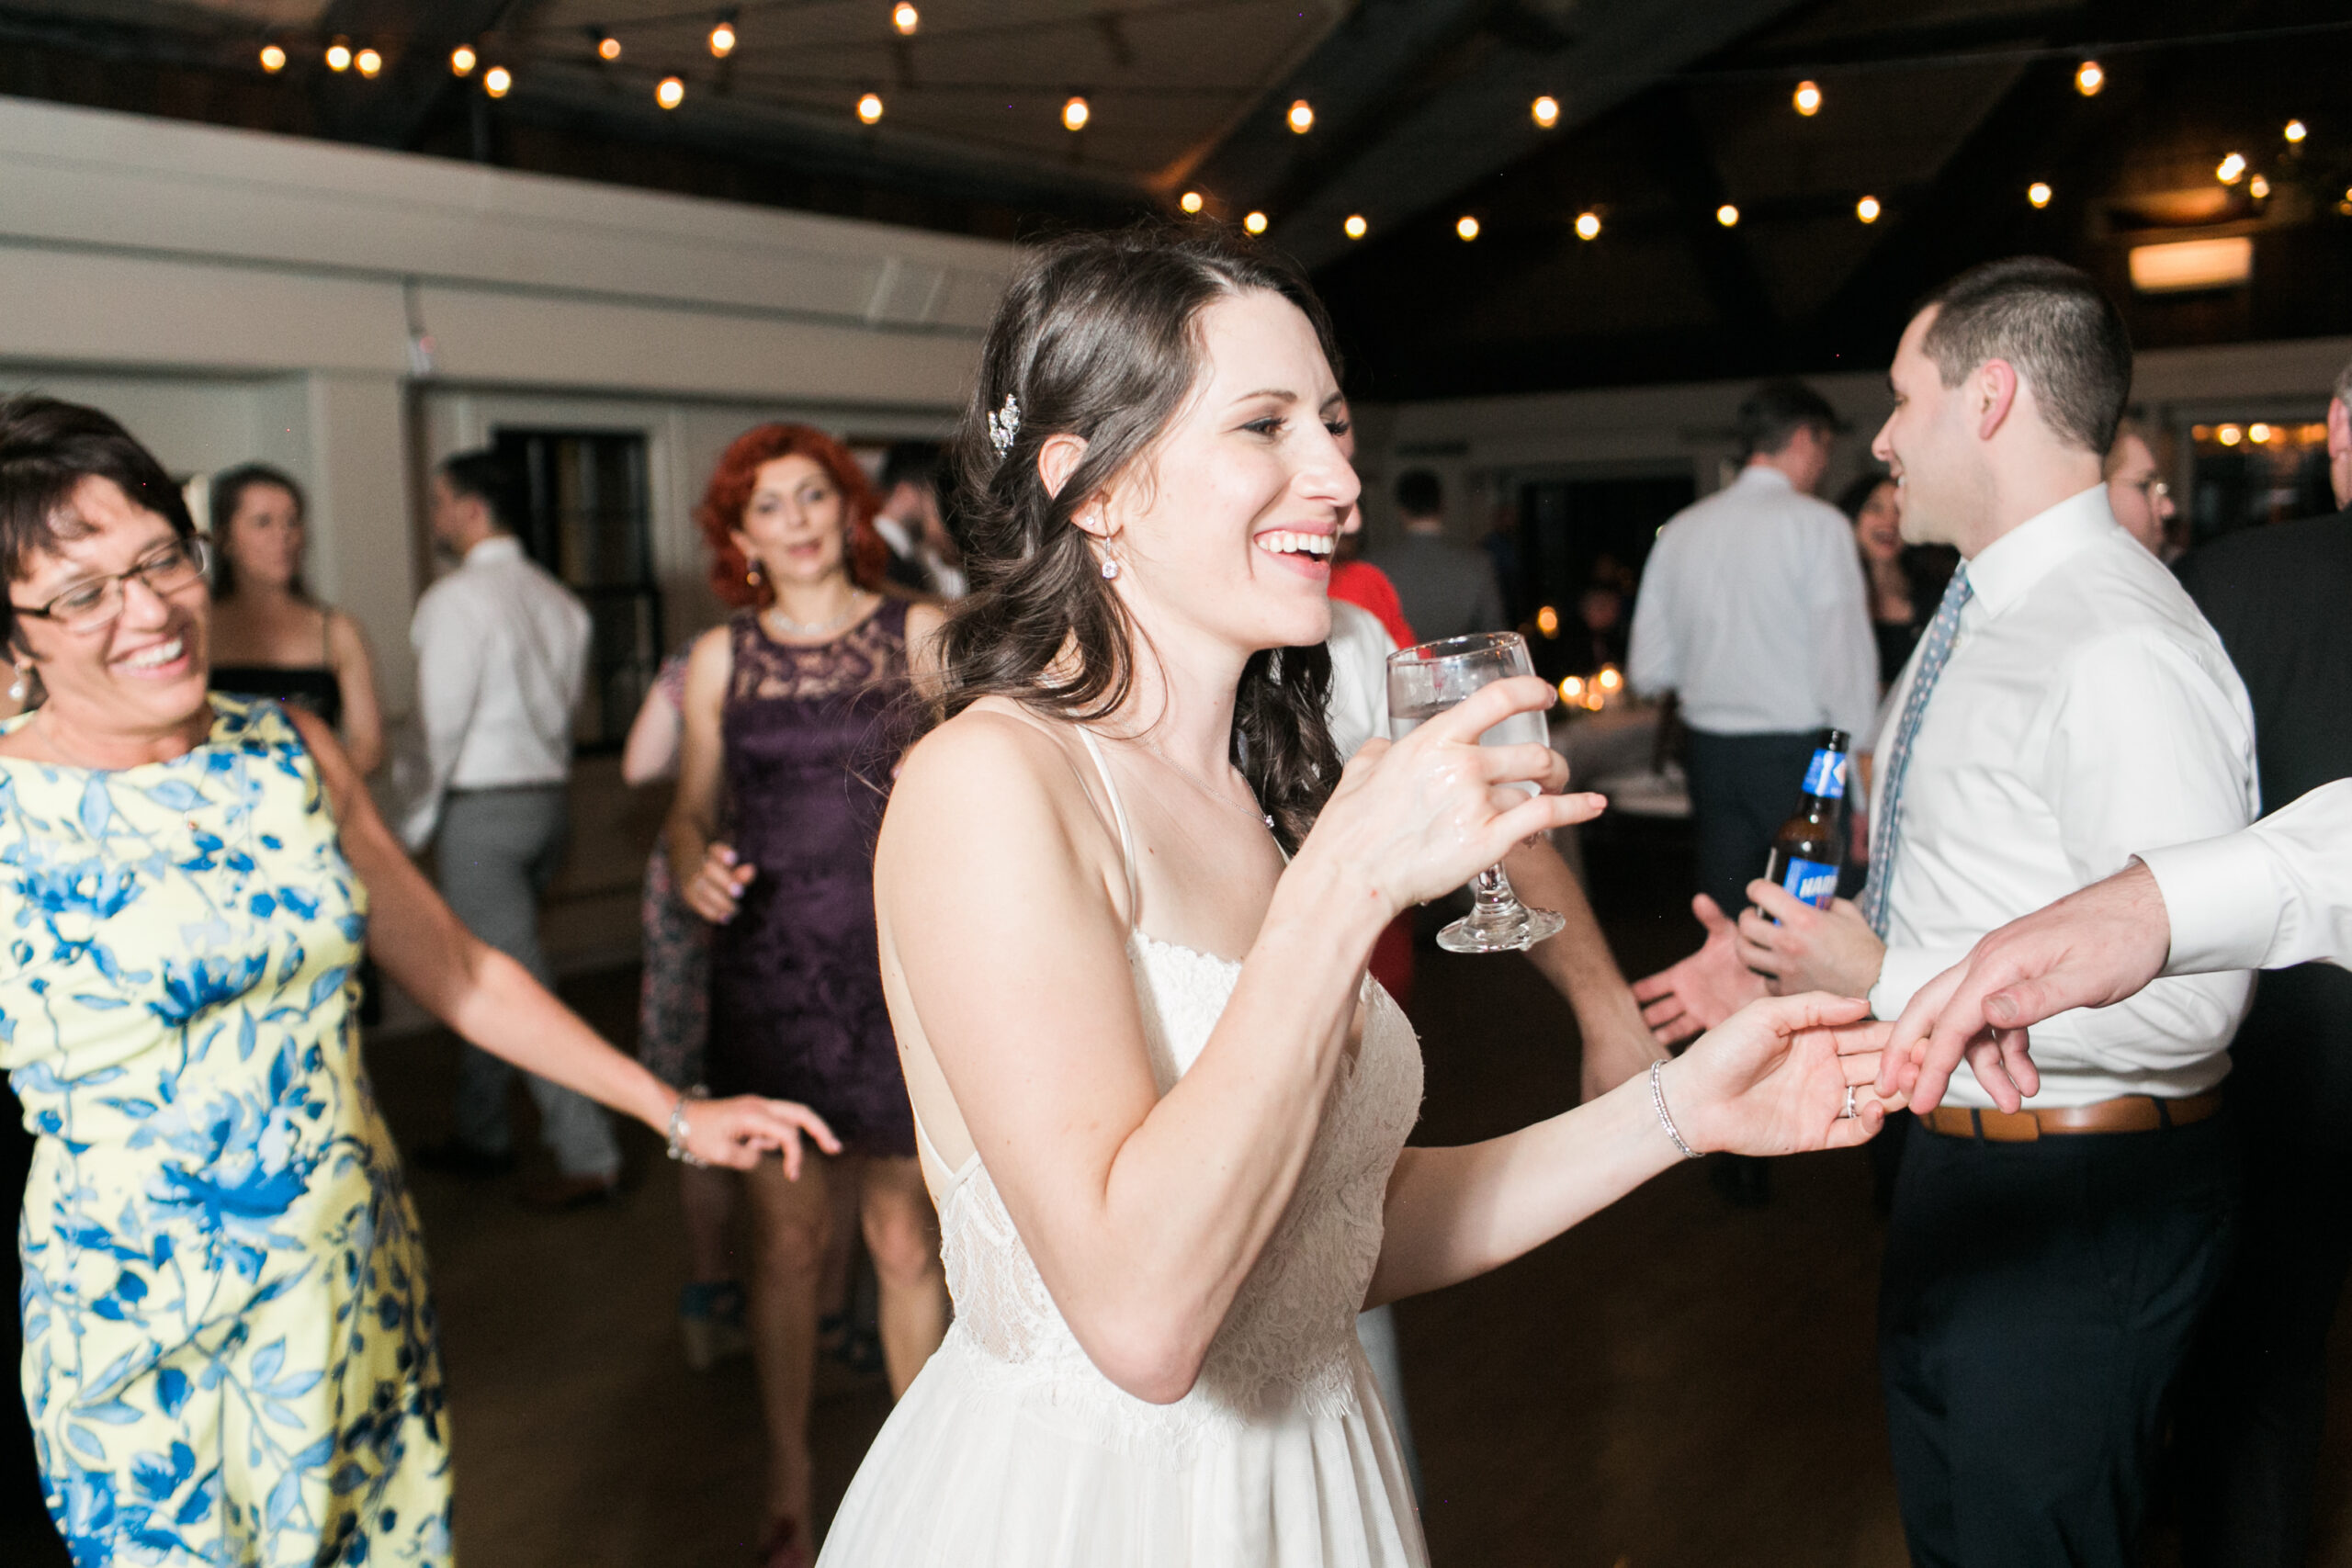 Smiling bride in white dress holding drink on dancefloor with older woman dancing in background with blue and yellow floral dress at Latitude 41 Wedding Mystic with bar lights hung up in background